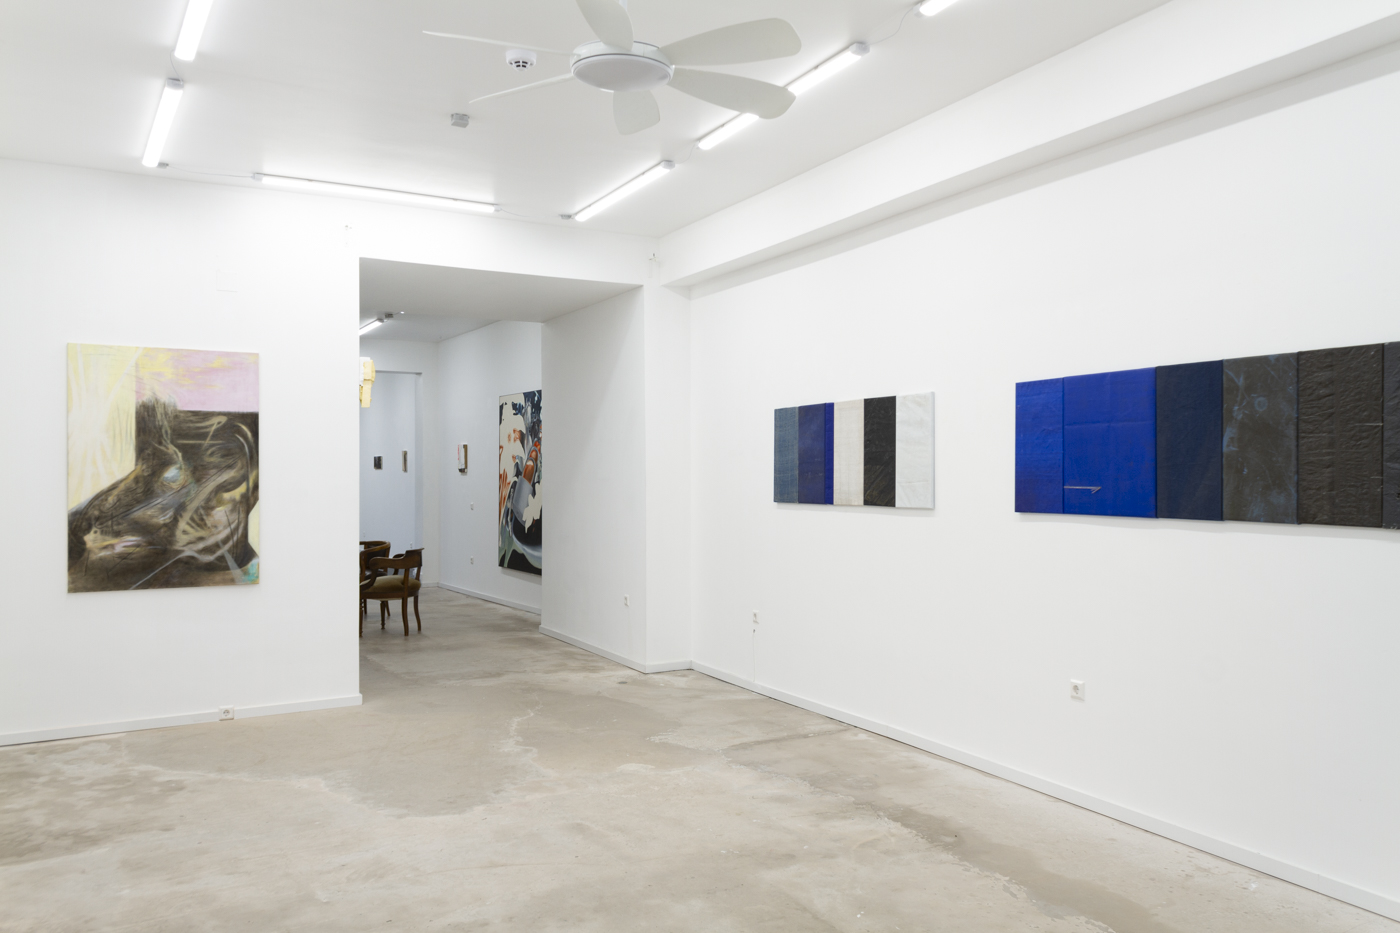 Exhibition Forever after at Reuter Bausch Art Gallery